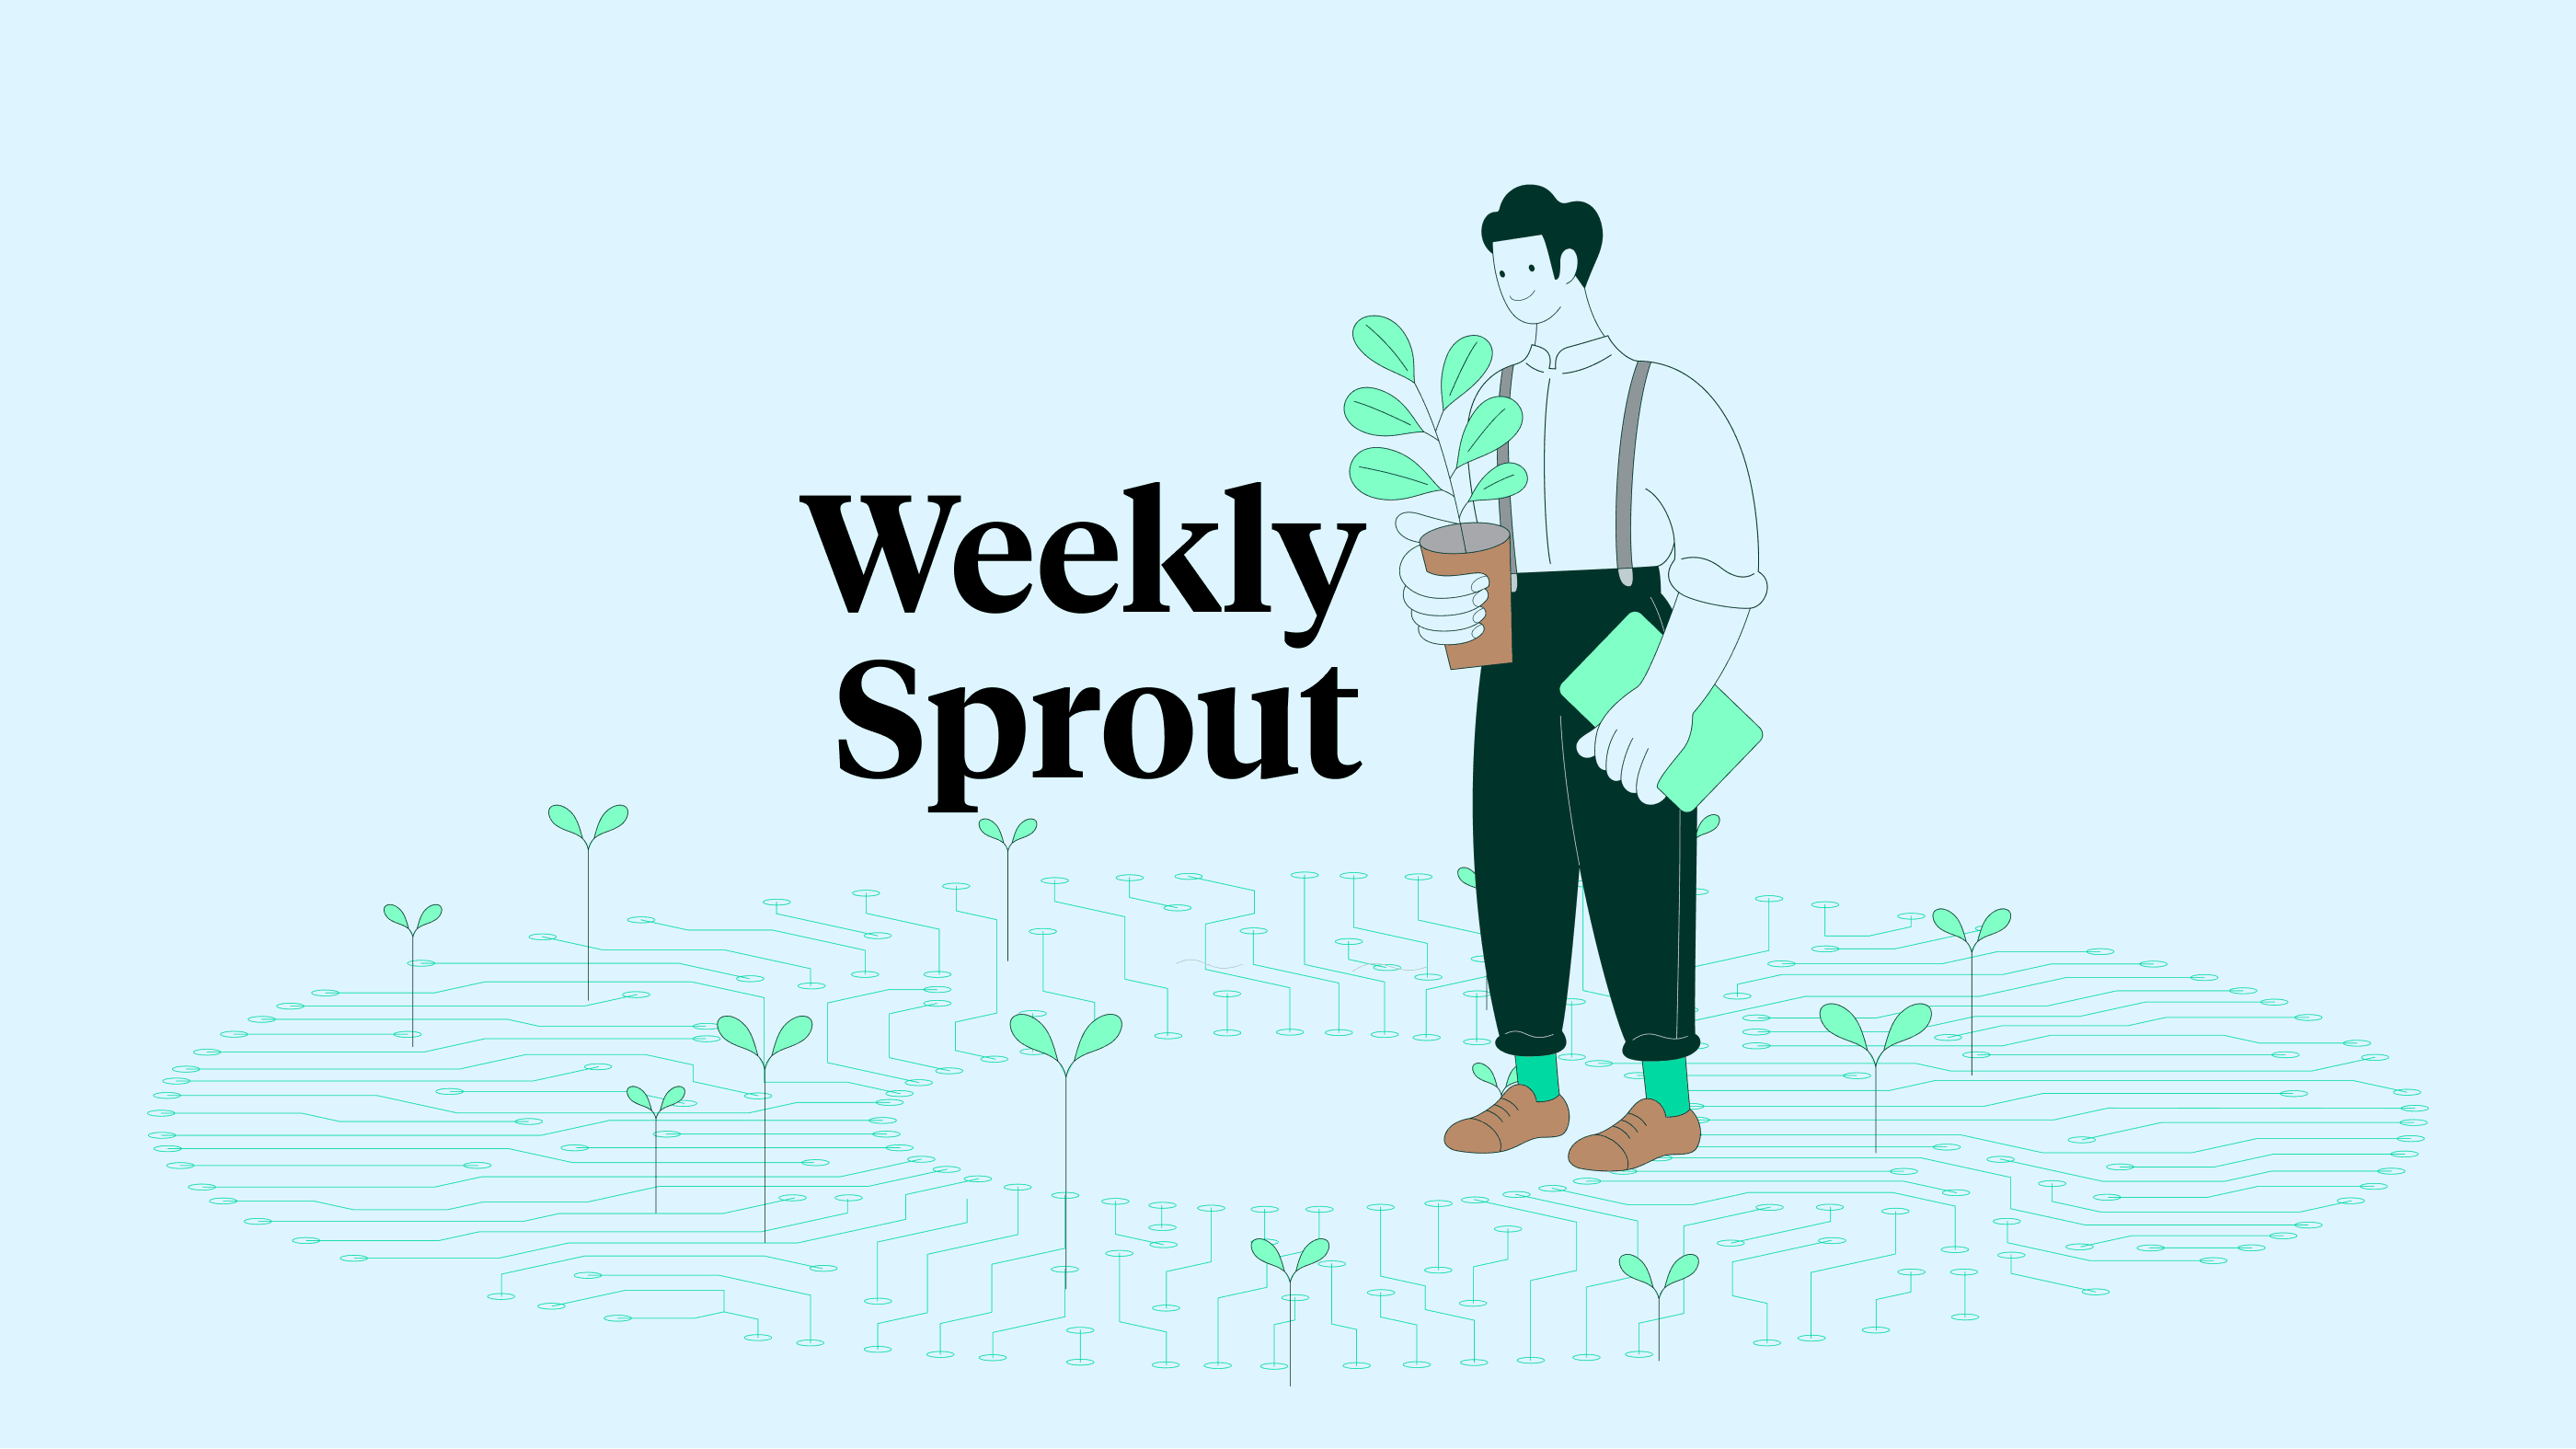 Weekly sprout image